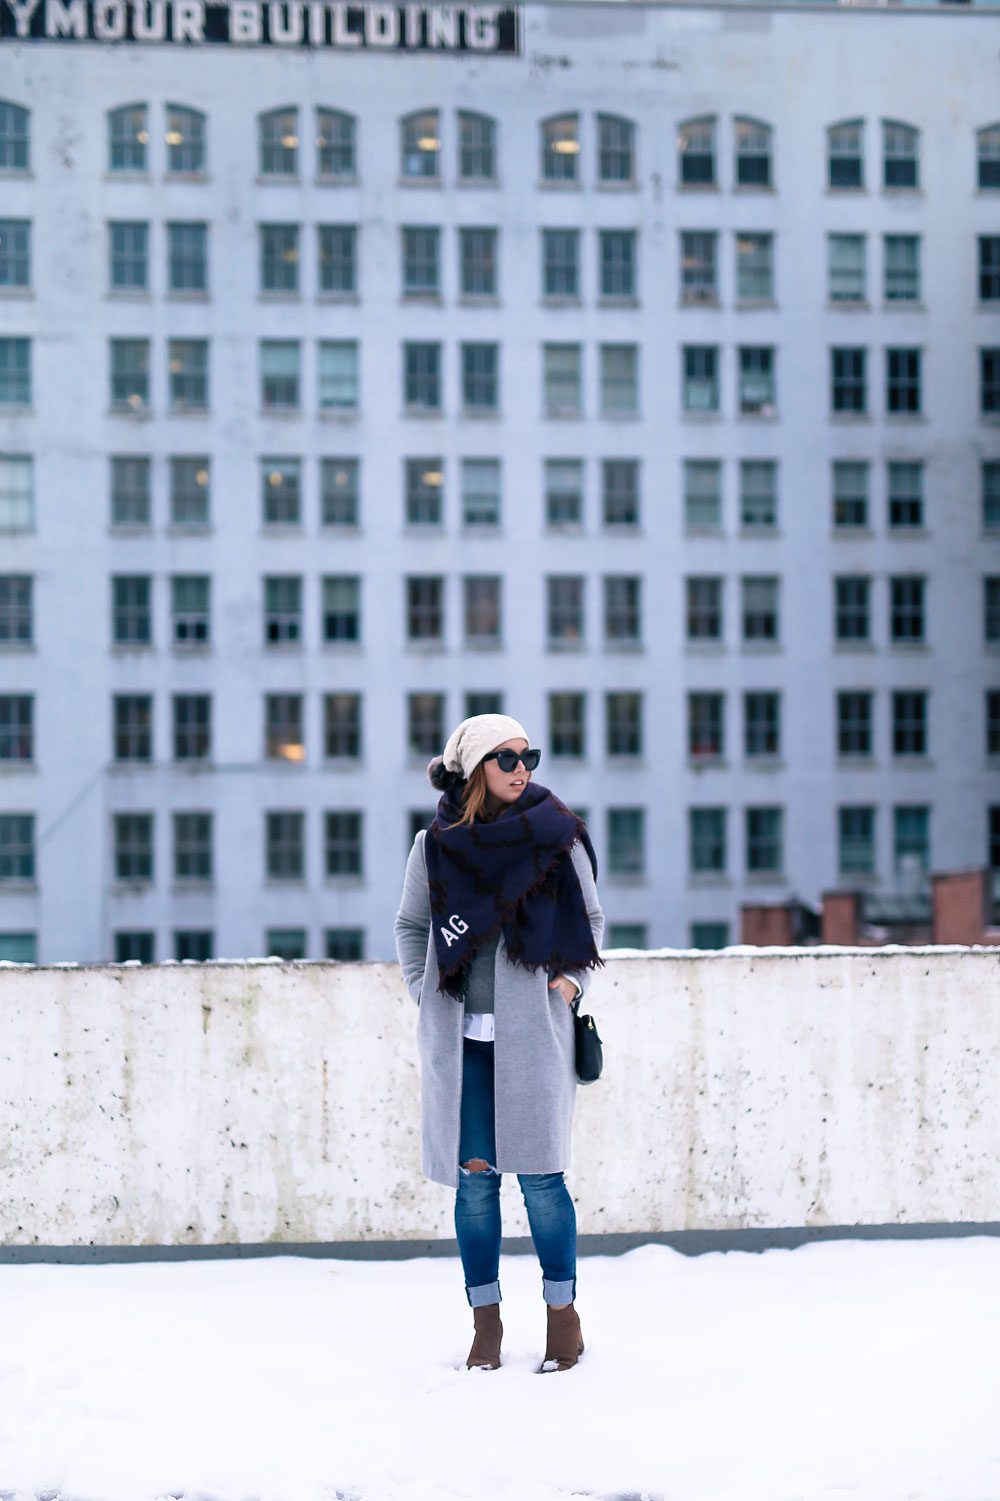 Cute outfit ideas in the snow - Aritzia blanket scarf, Aritzia grey wool coat, Tilley beanie, Mavi skinny jeans, Urban Outfitters ankle boots, Celine Caty sunglasses, layered oxford shirt